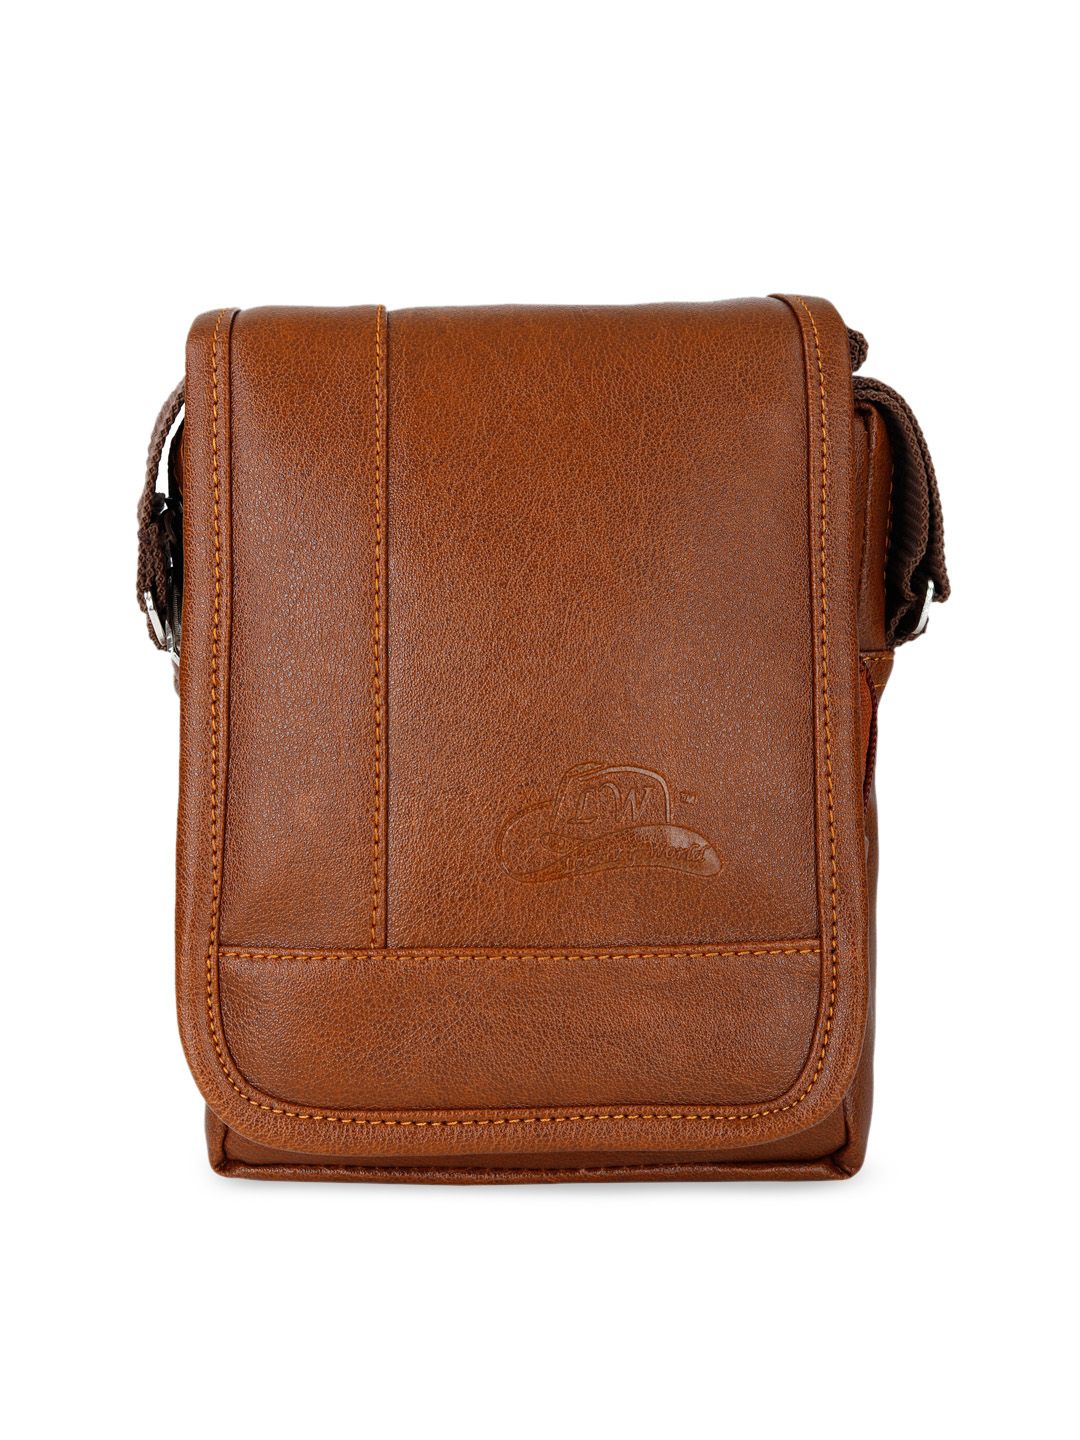 Leather World Unisex Brown Solid Sling Bag Price in India